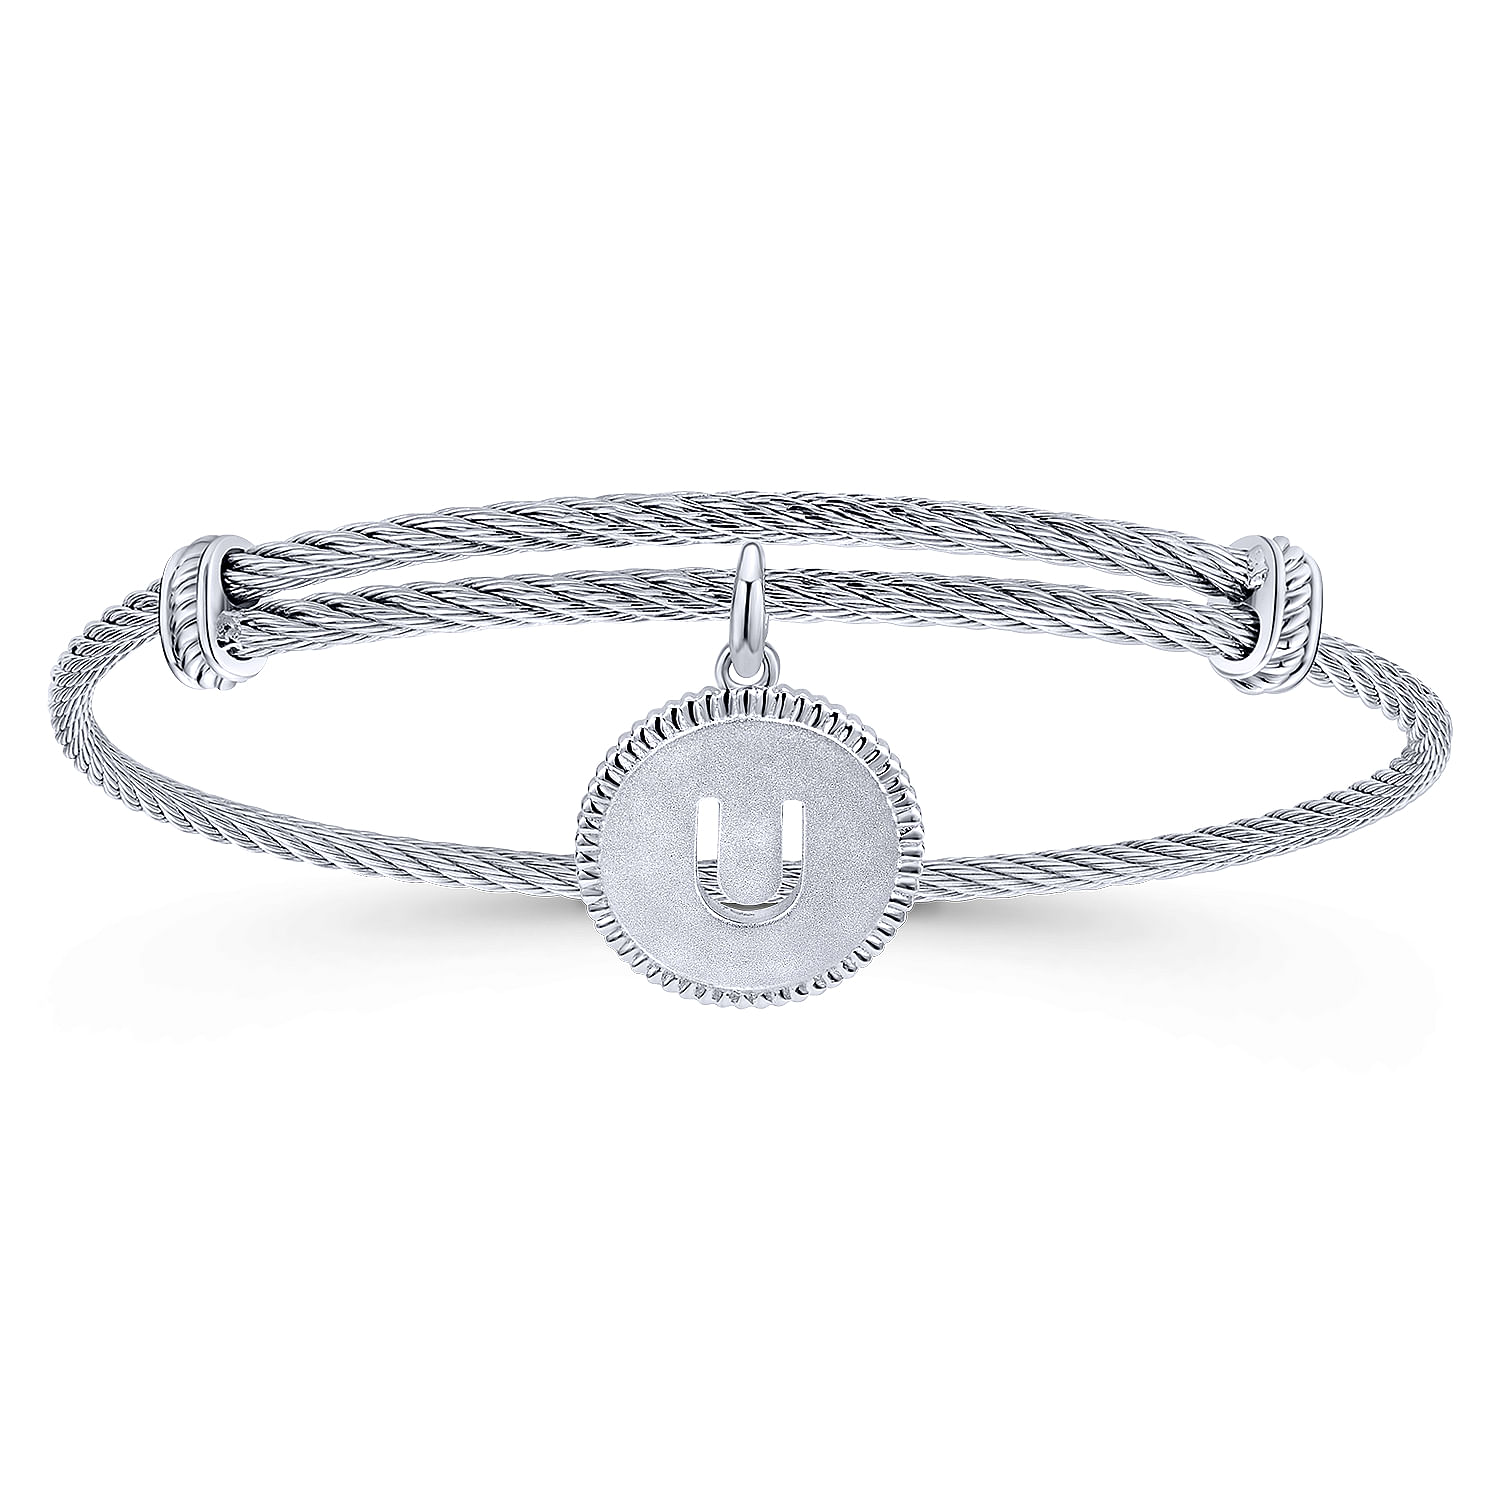 Adjustable Twisted Cable Stainless Steel Bangle with Sterling Silver U Initial Charm